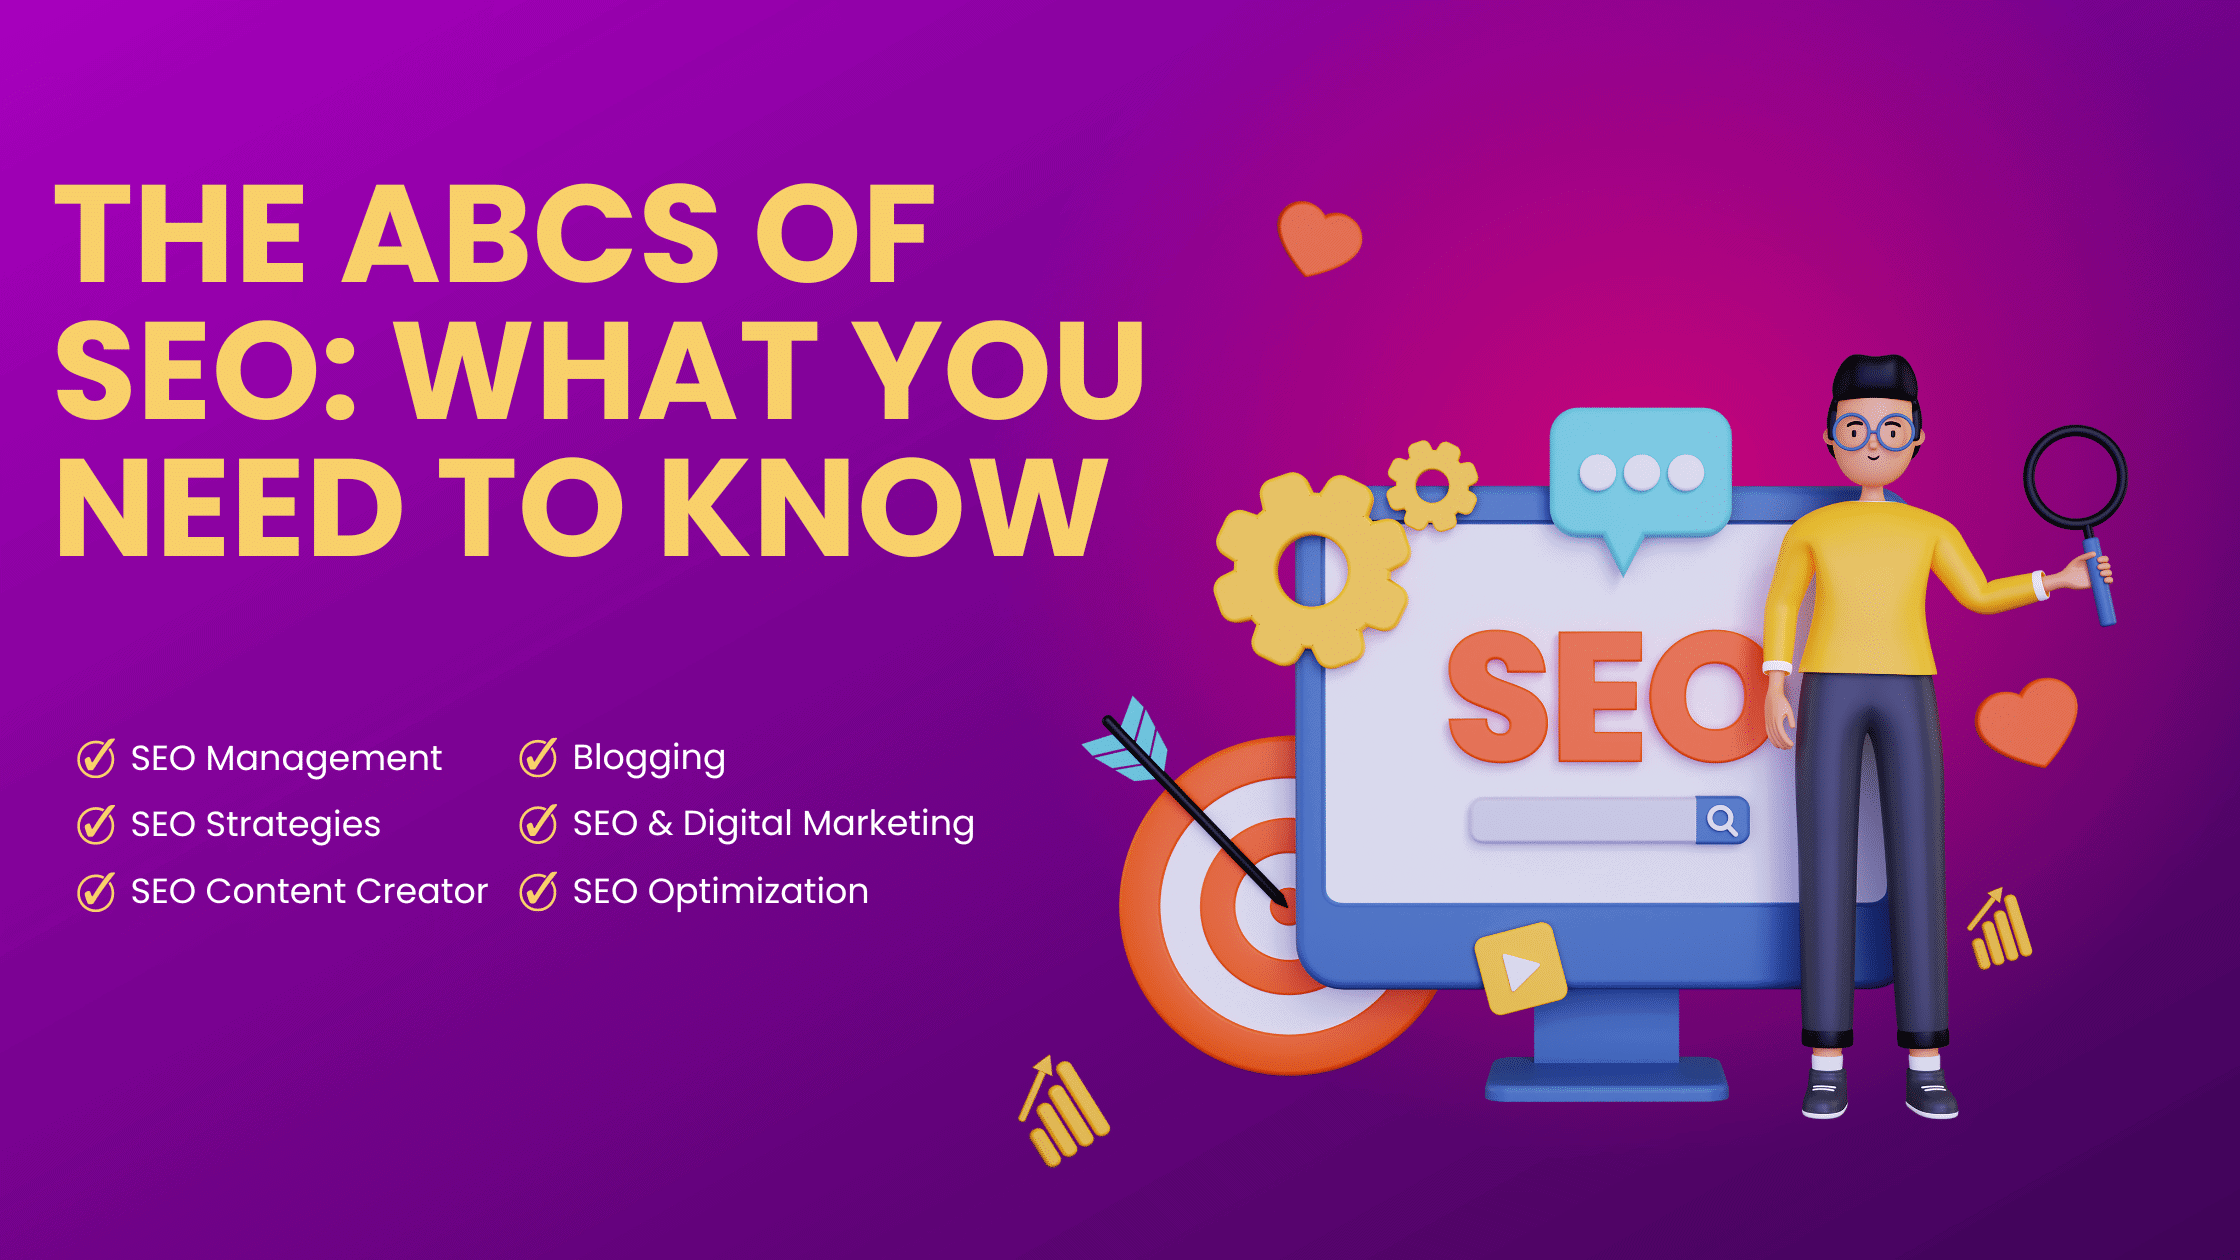 The ABCs of SEO: What You Need to Know